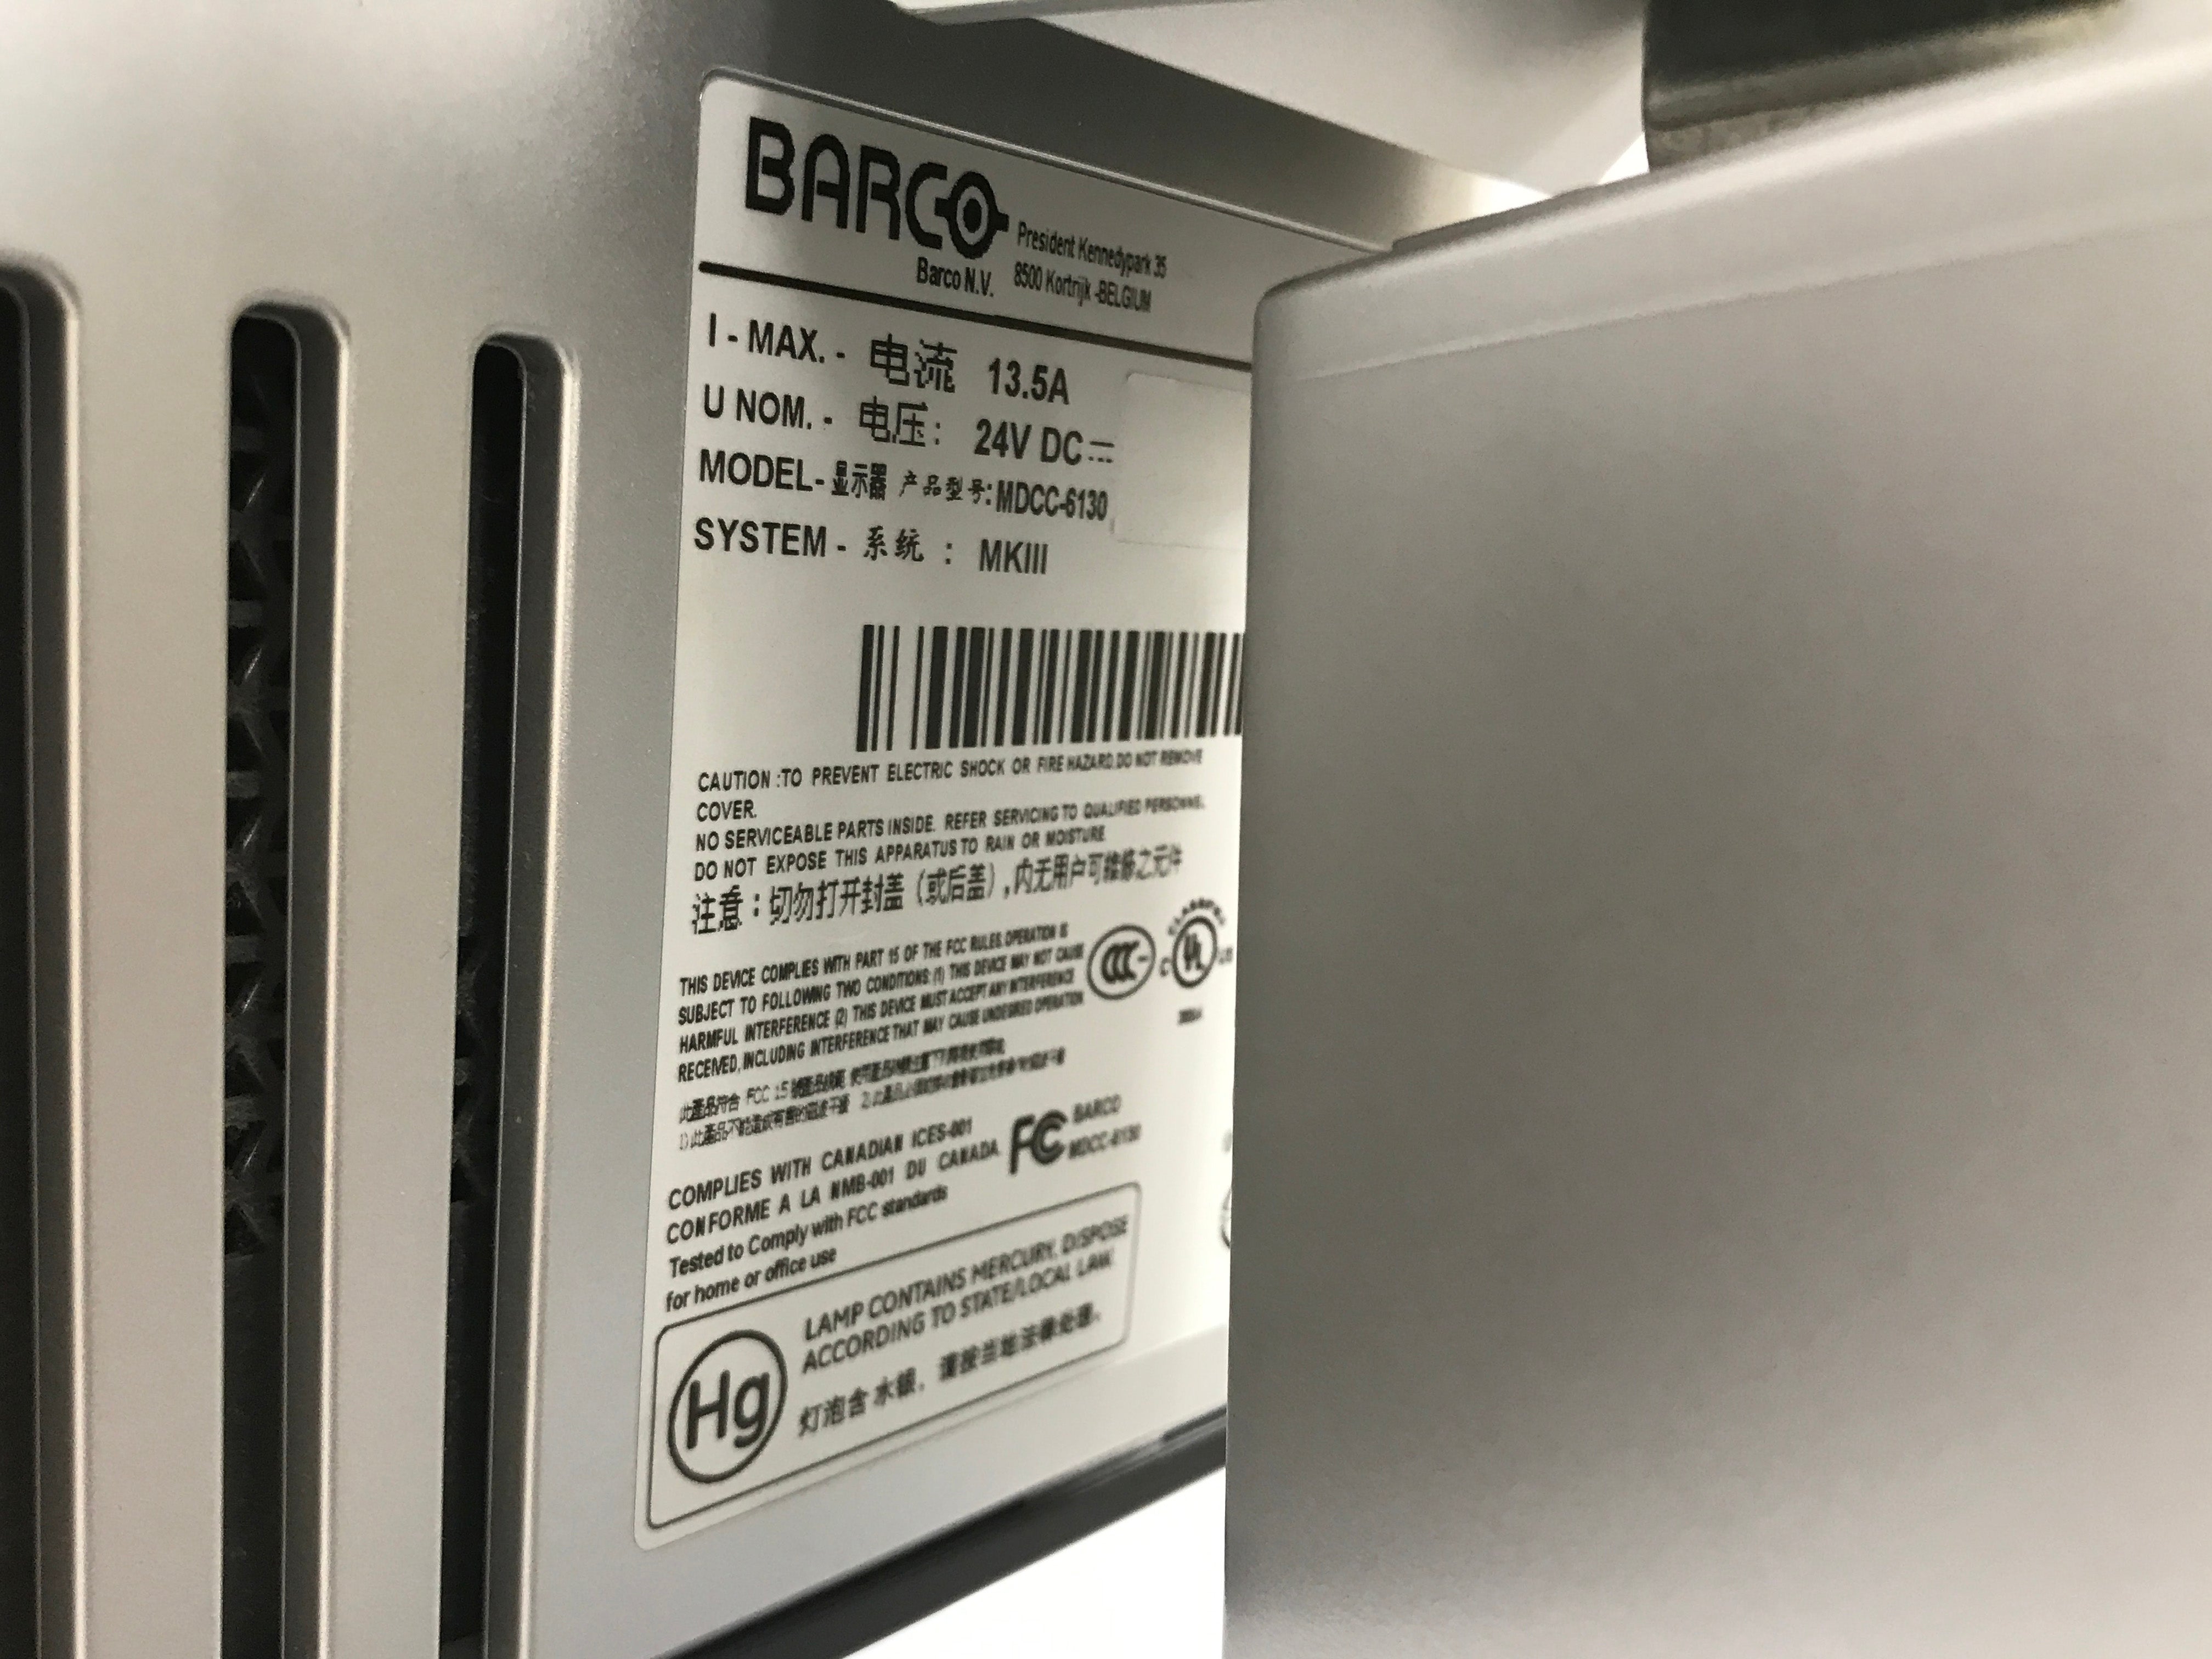 Barco Coronis Fusion MDCC-6130 w/ Barco PS 60601 Power Supply *Damaged Edges*